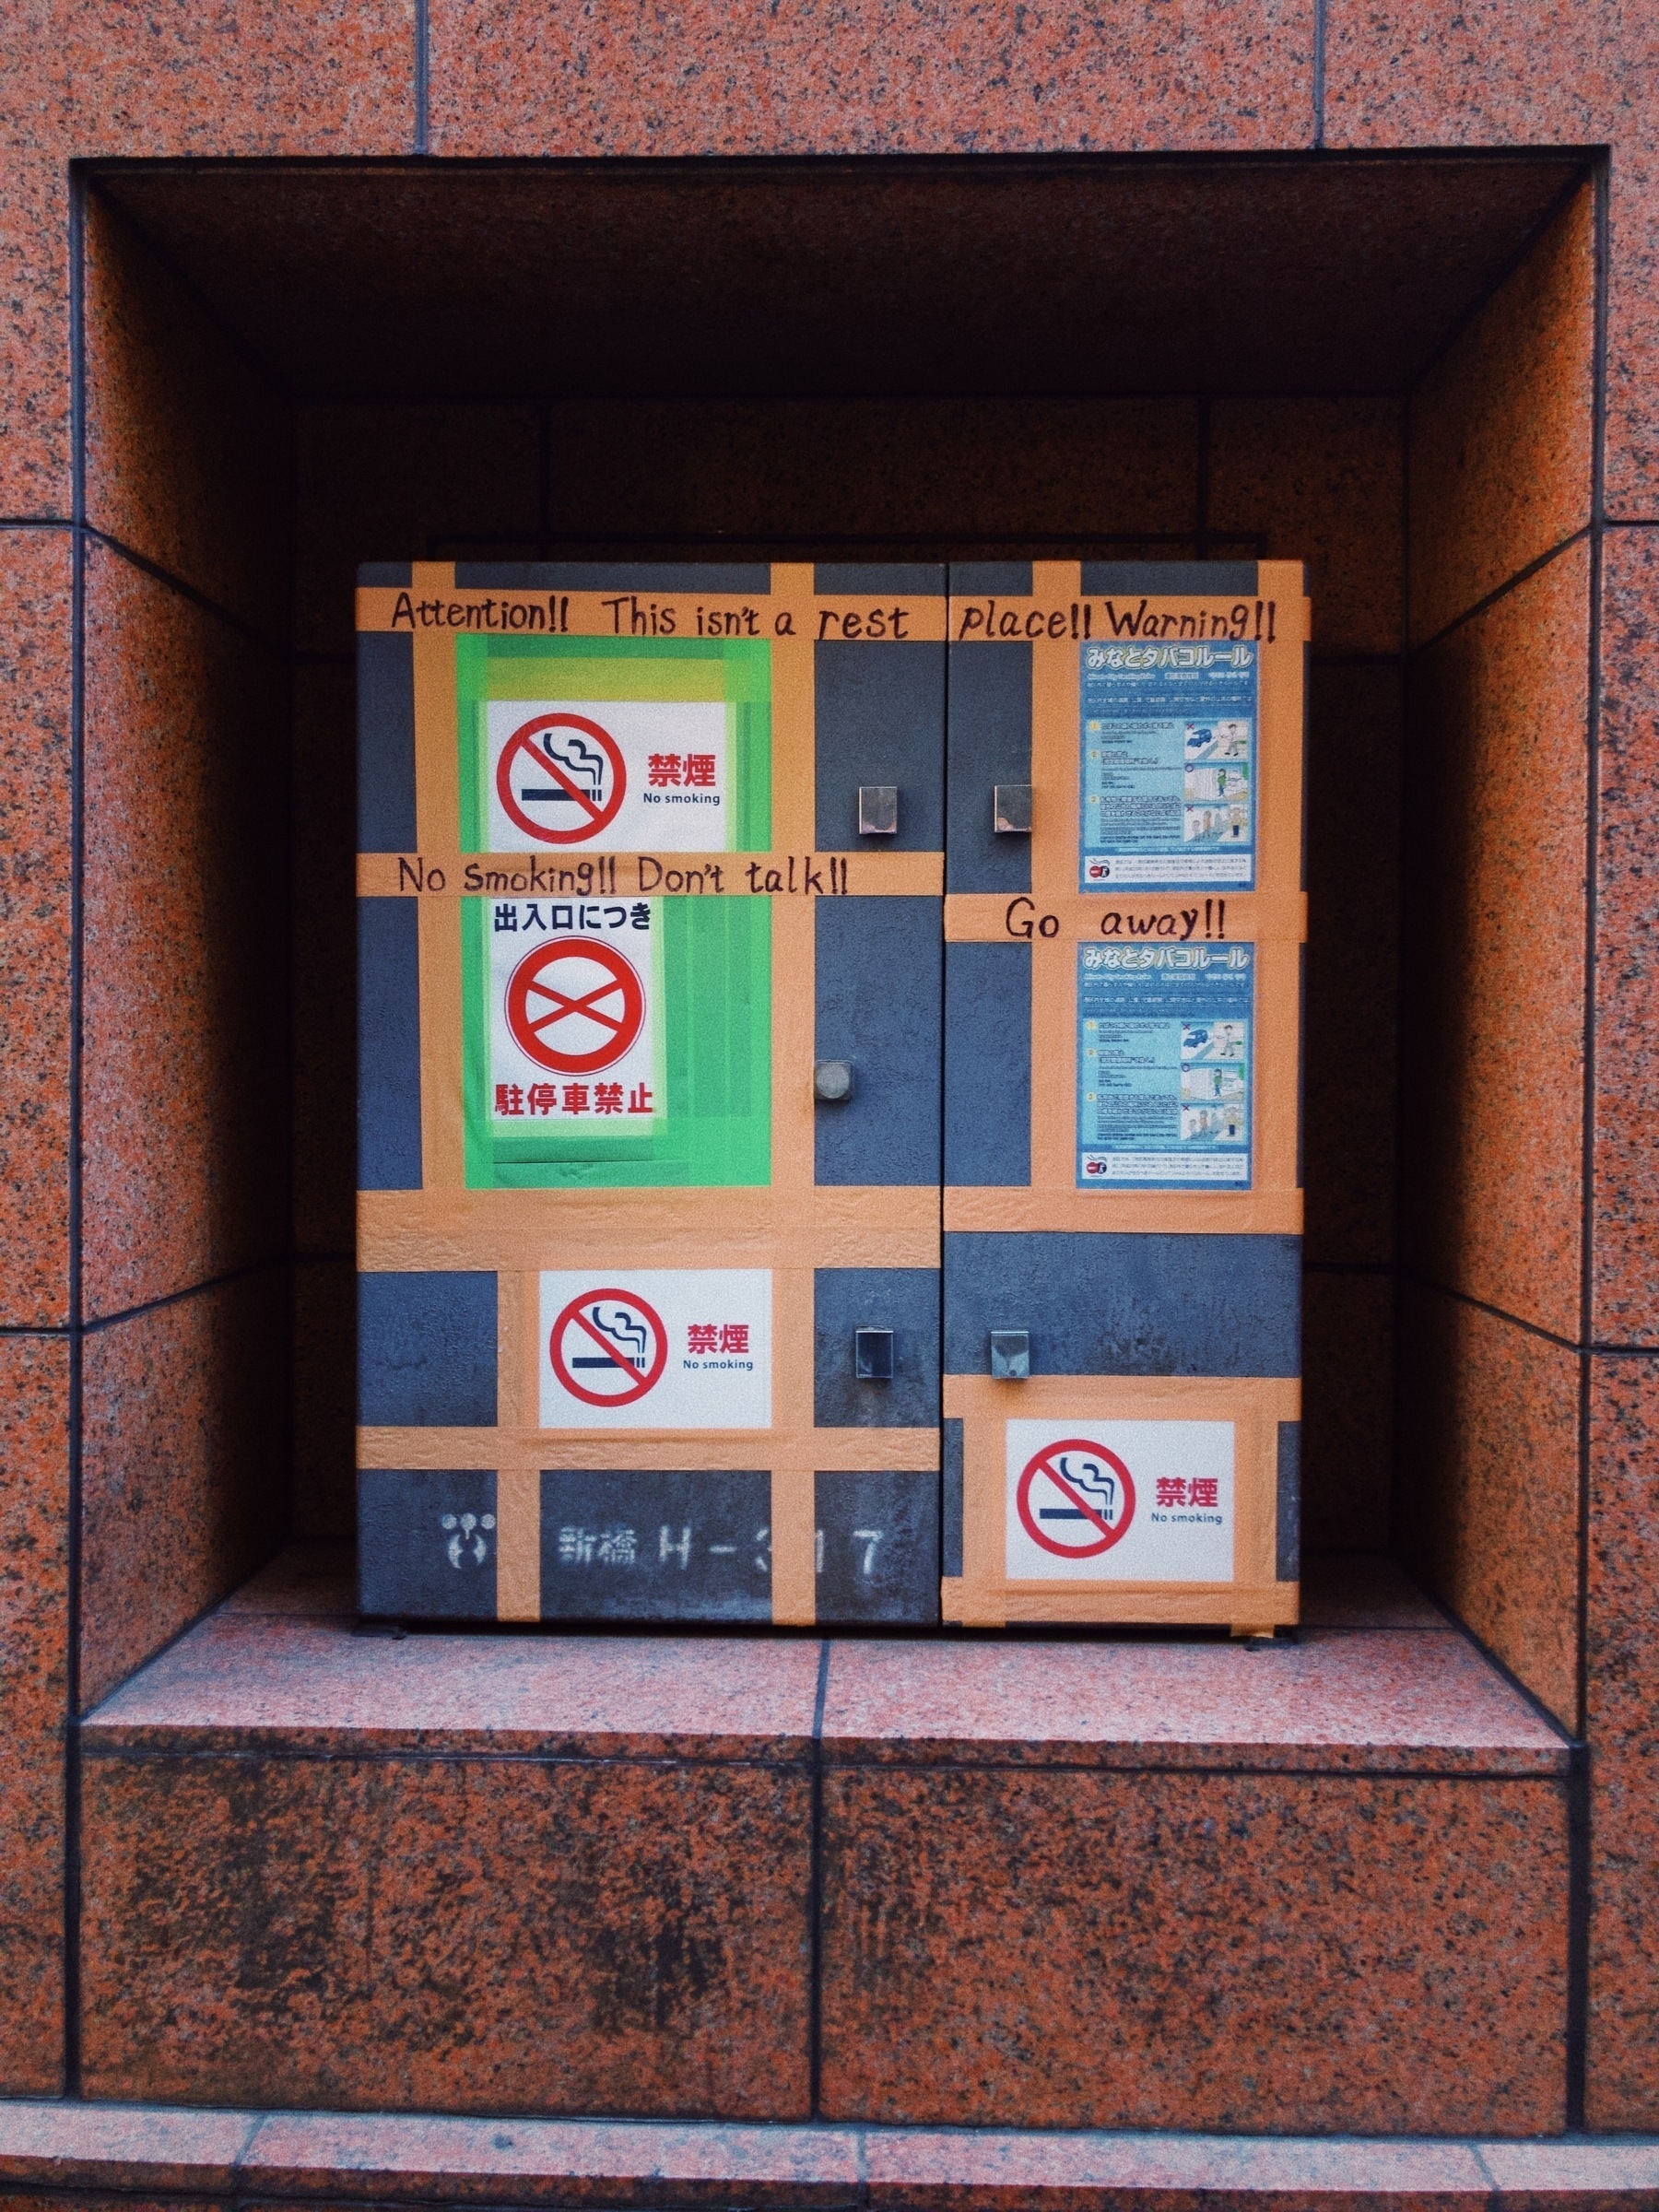 Makeshift English Non-smoking Signs on Duct Tape, photo by Rick Cogley